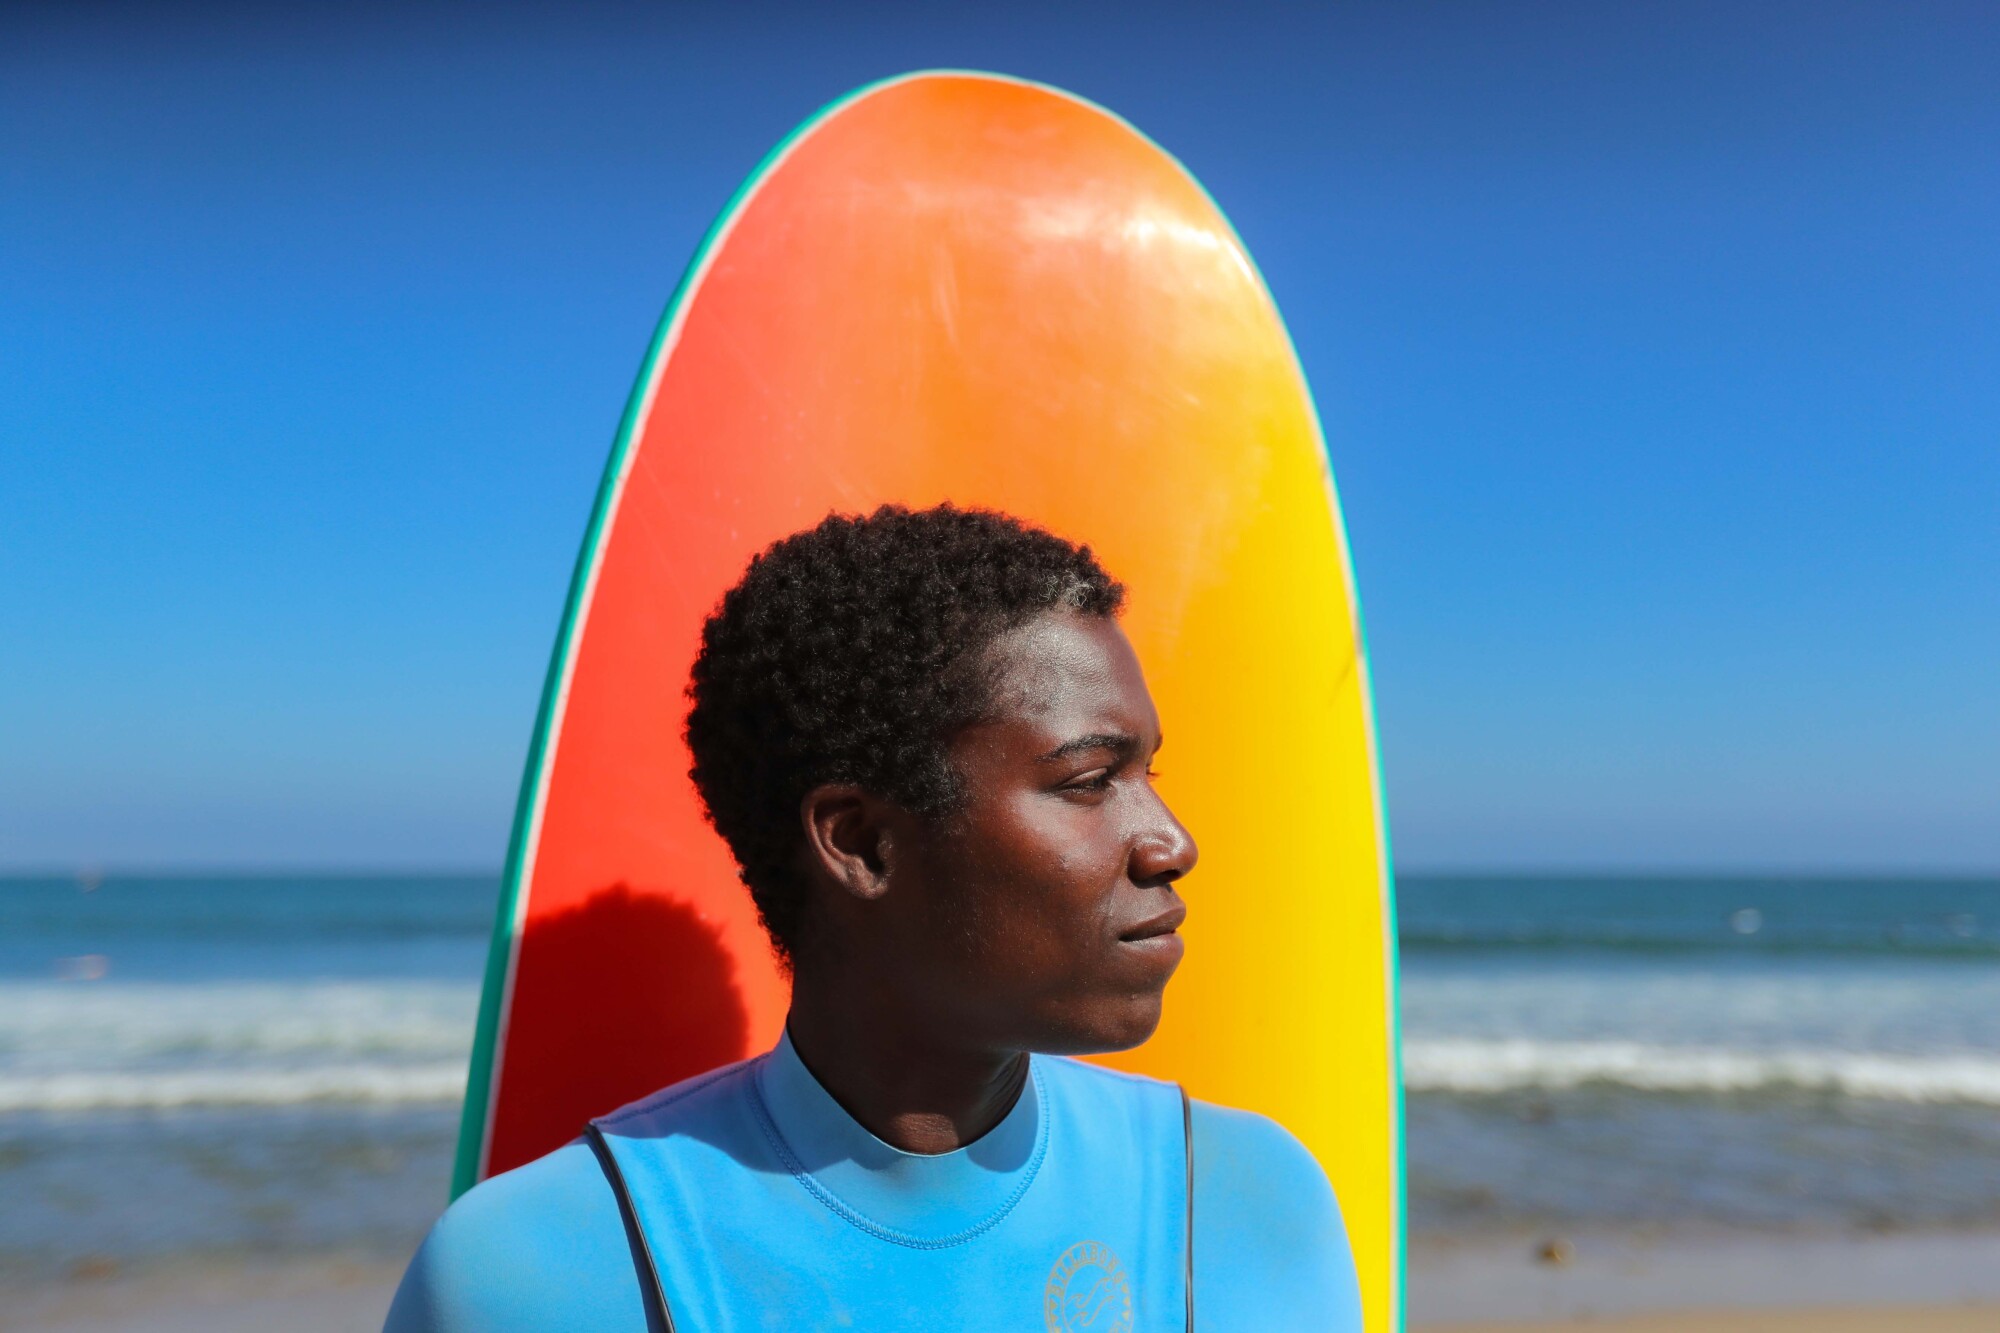 A man poses in front of a surfboard and the sea.